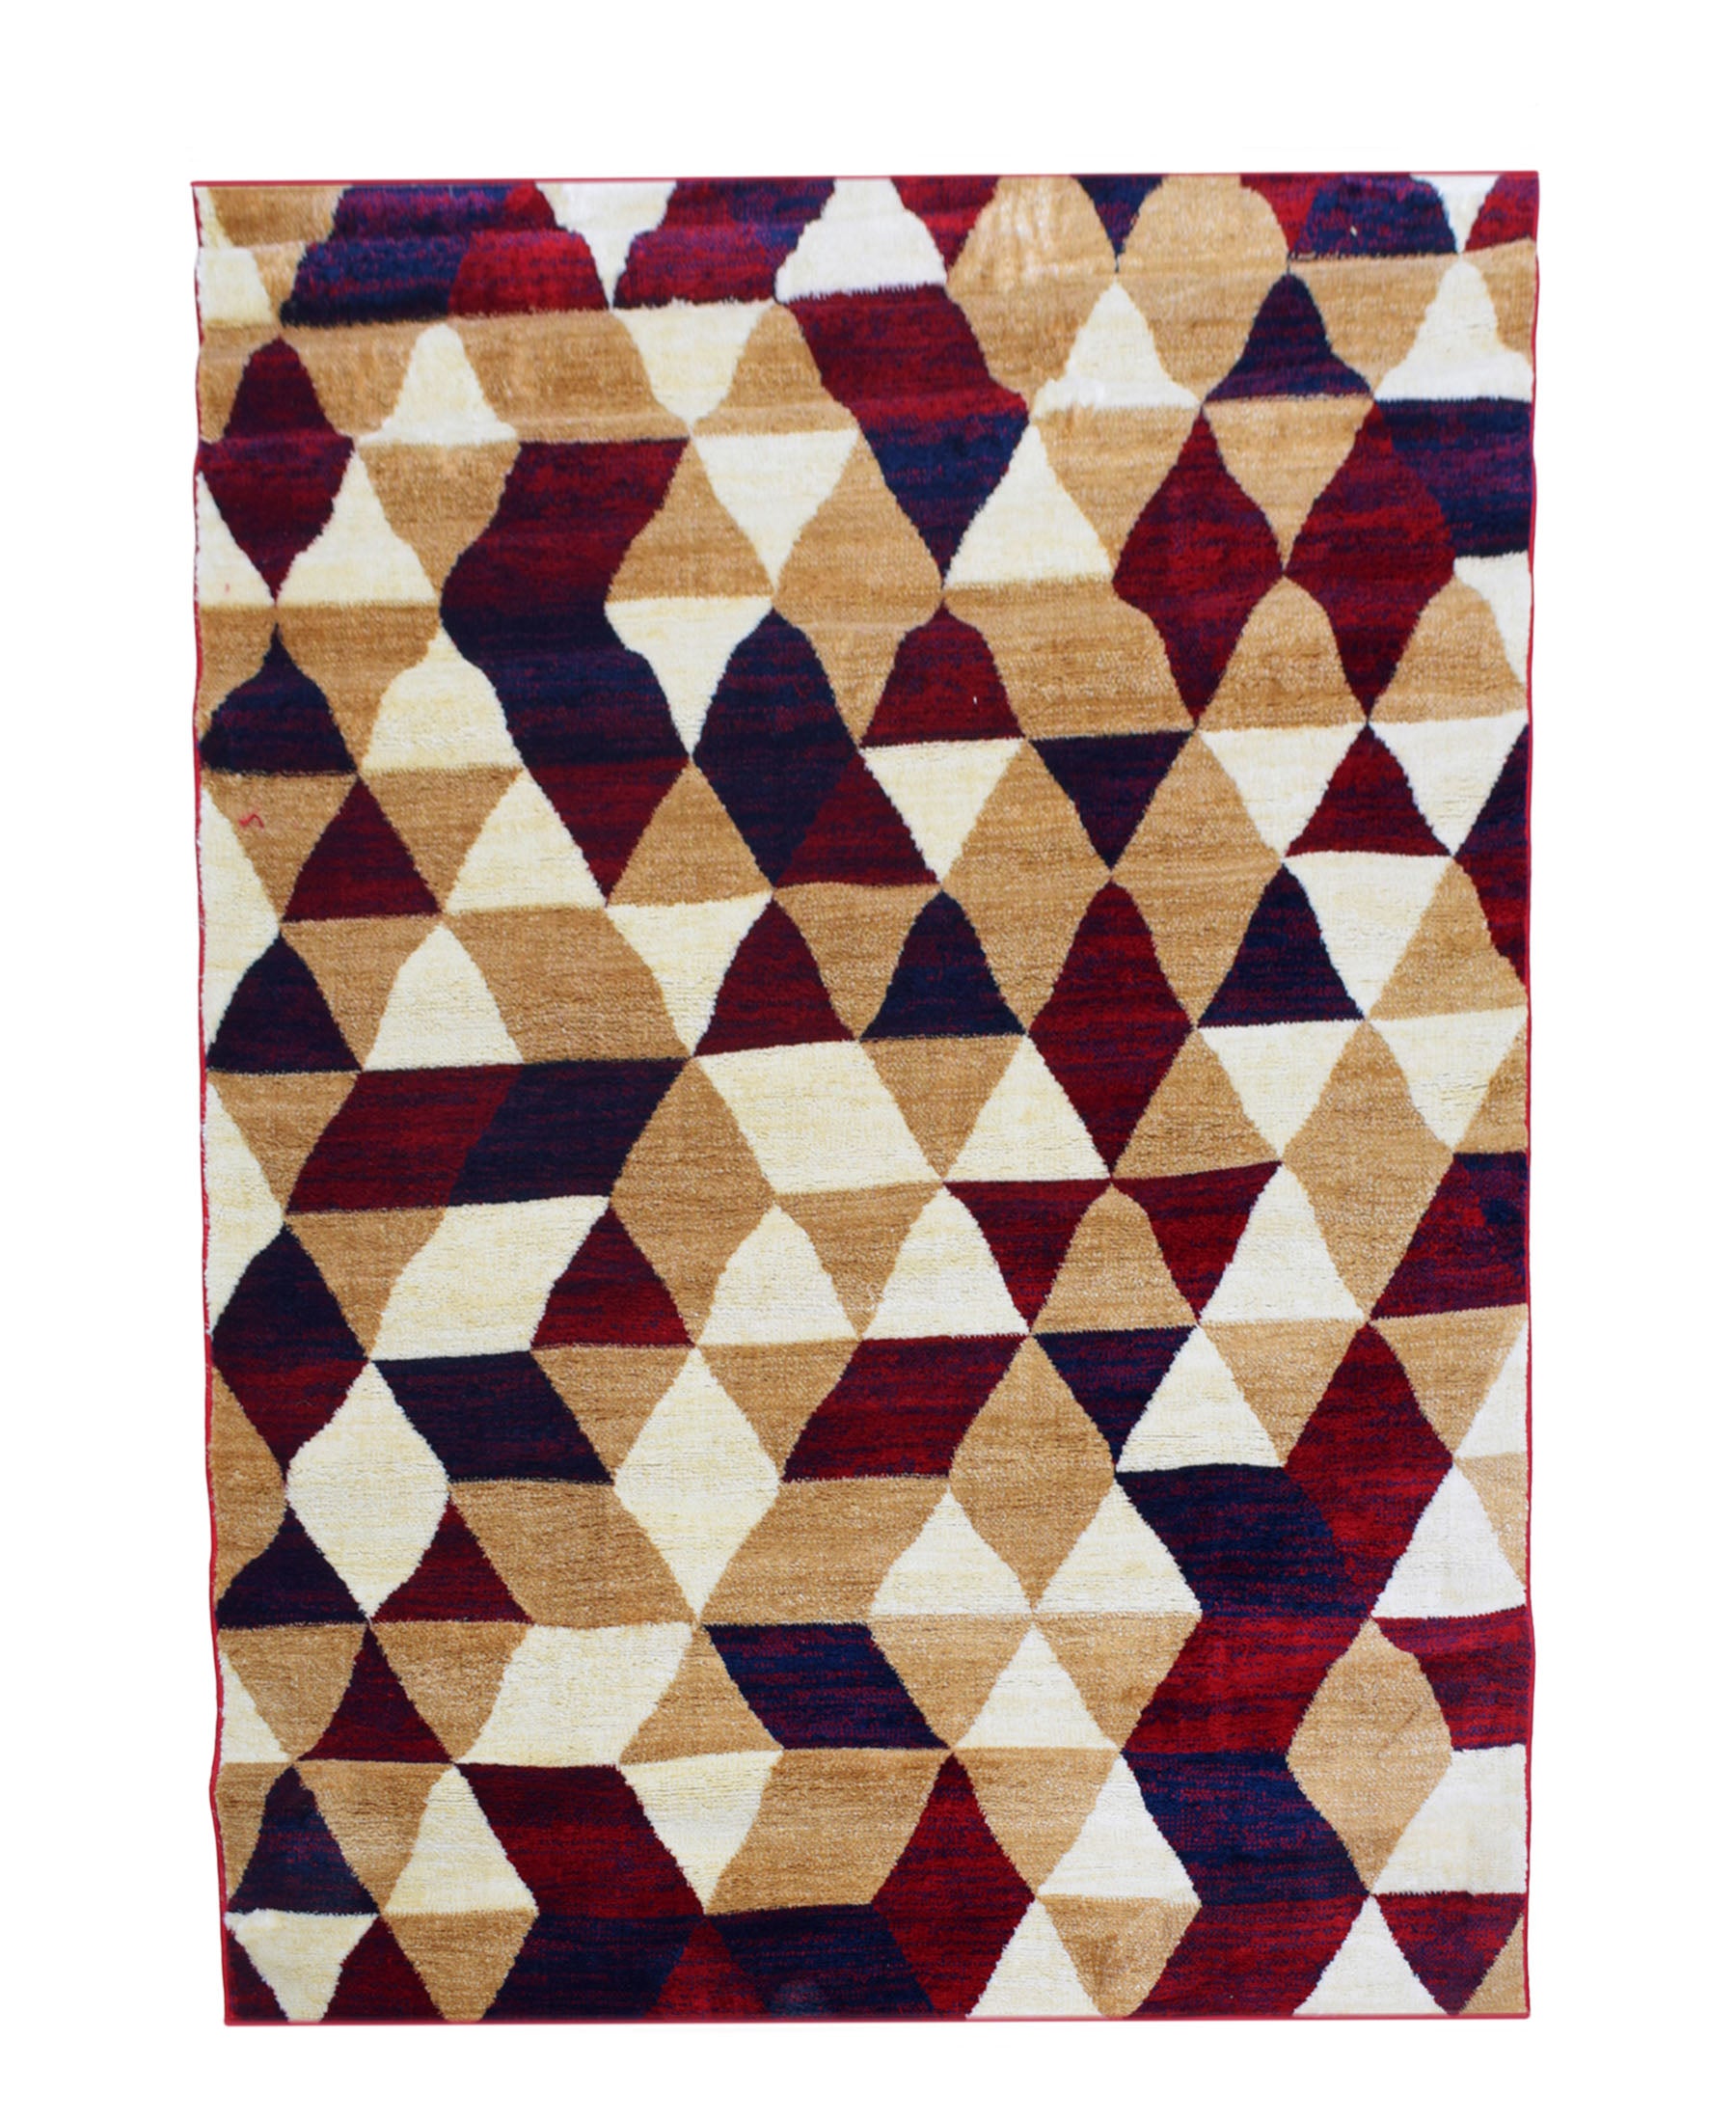 Cape Town Mirage Carpet 2000mm × 2700mm - Red